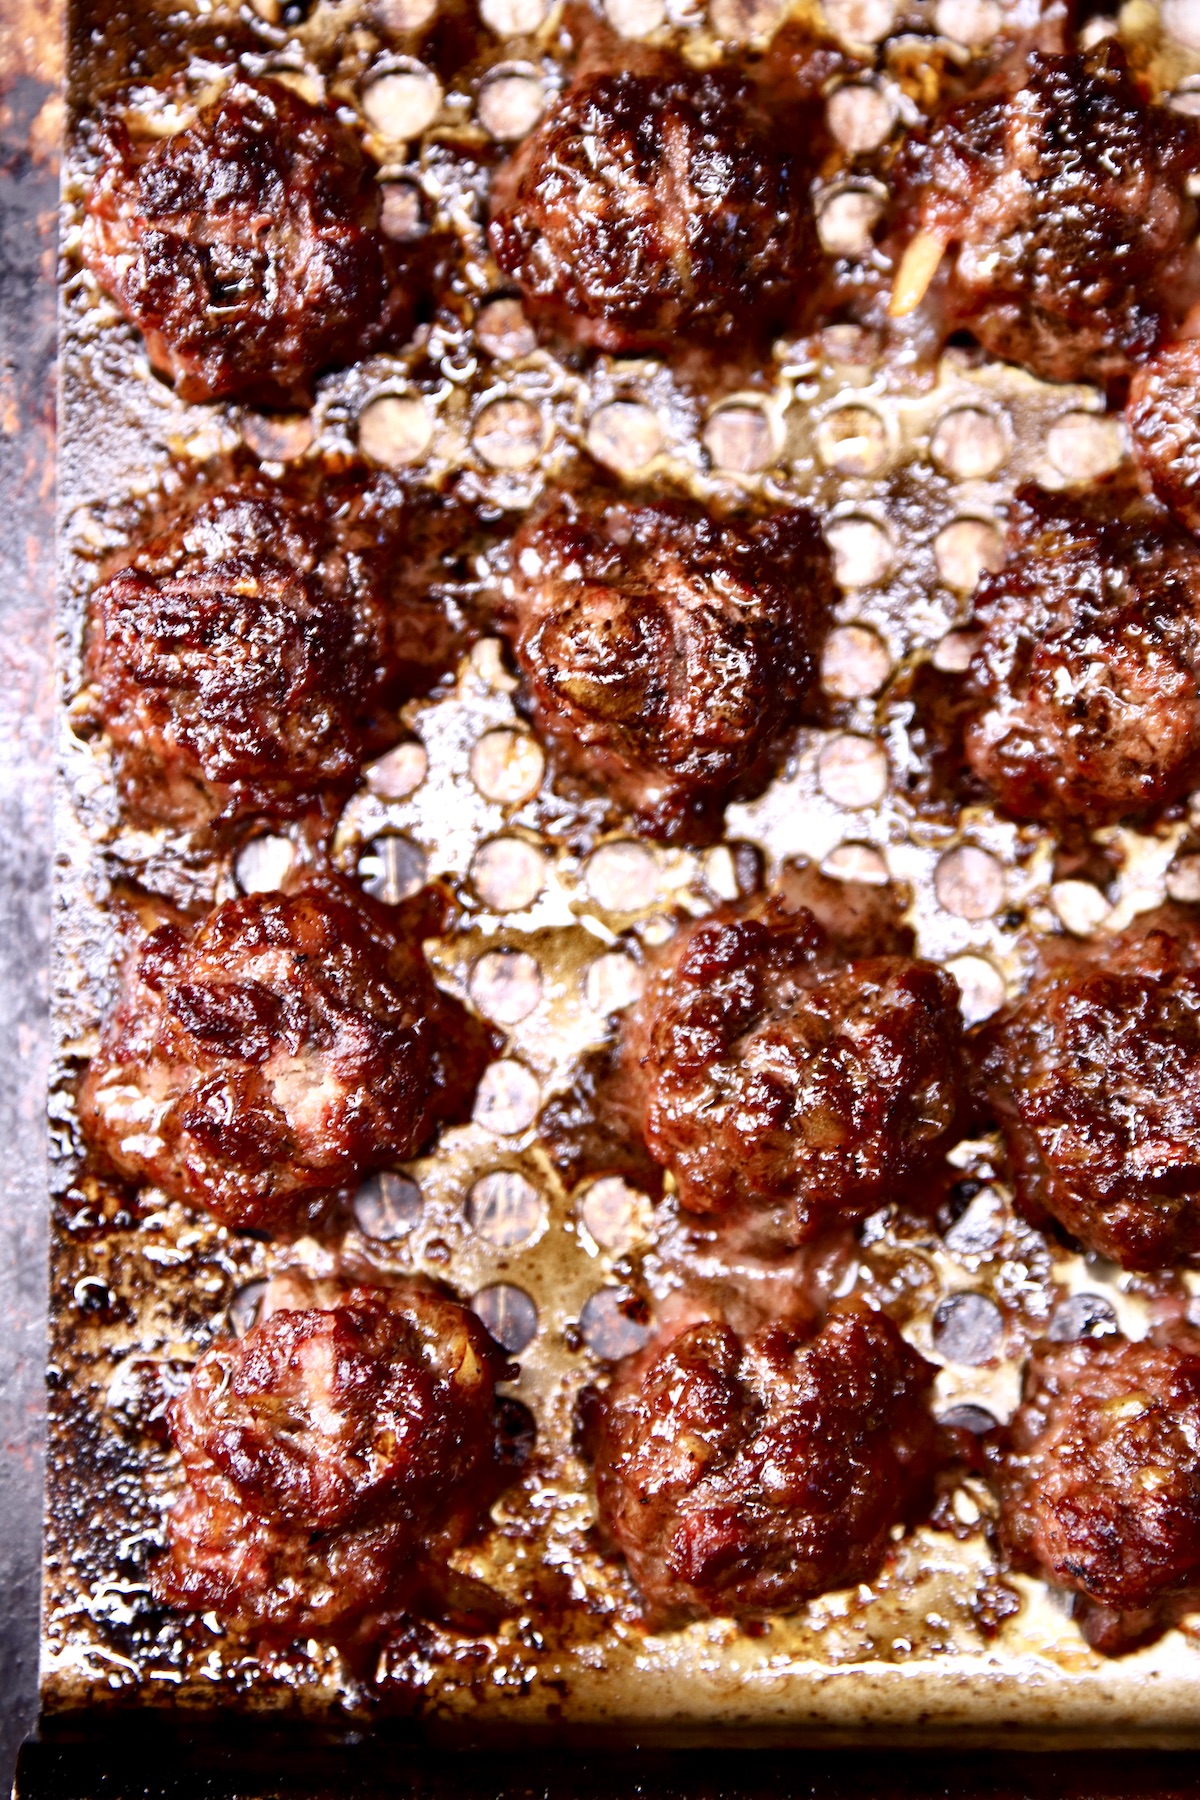 grilled meatballs -close up